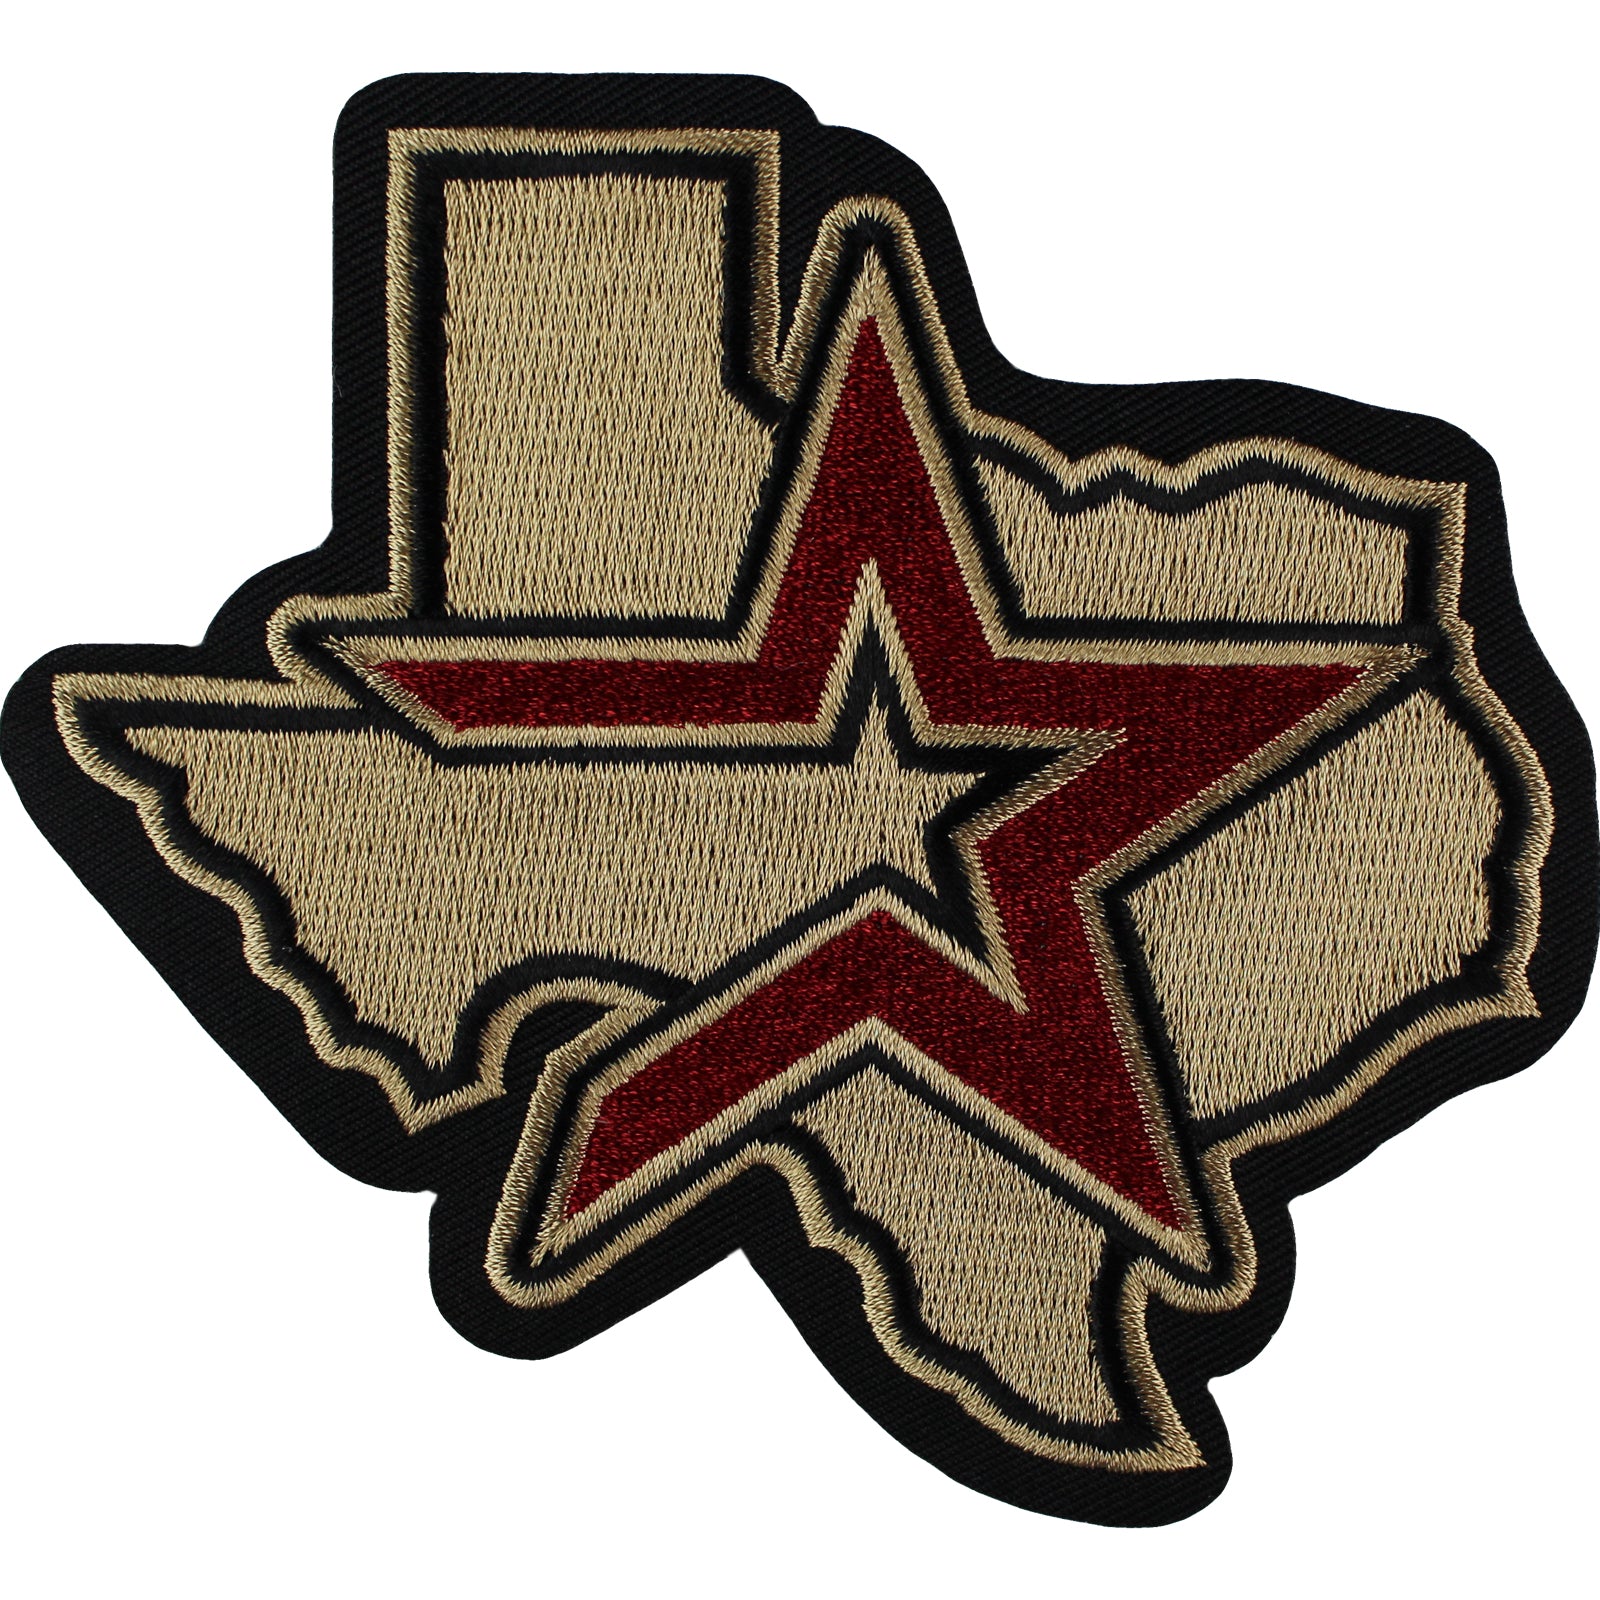  Houston Astros Road Collectors Patch : Arts, Crafts & Sewing